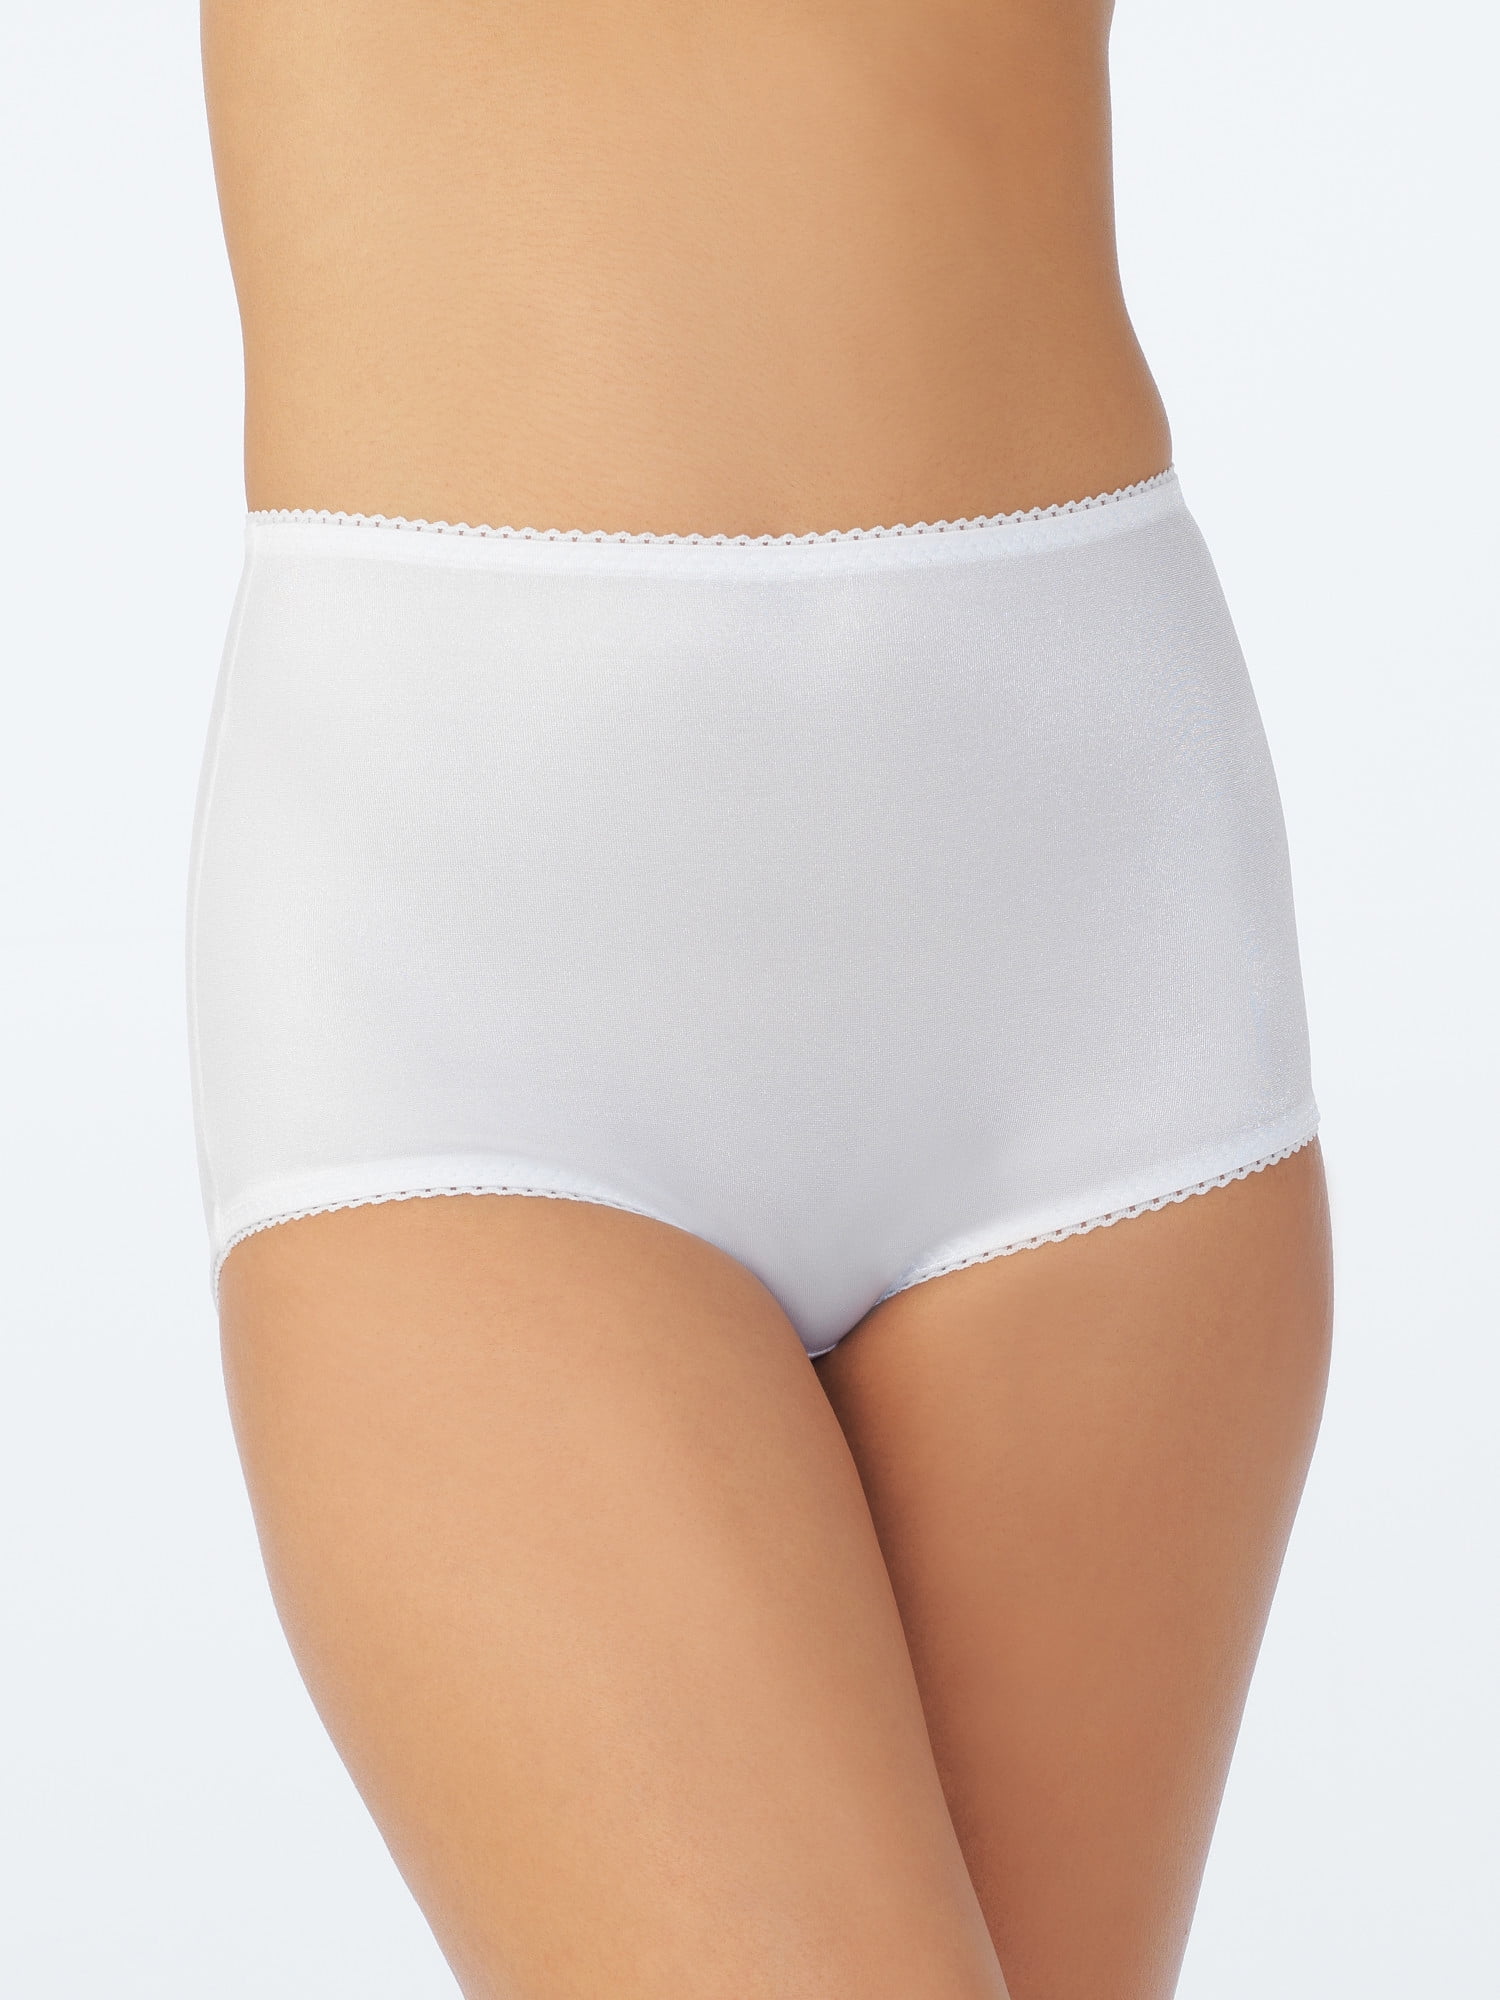 Women's Vassarette 40001 Undershapers Smoothing & Shaping Brief Panty  (White Ice XL) 